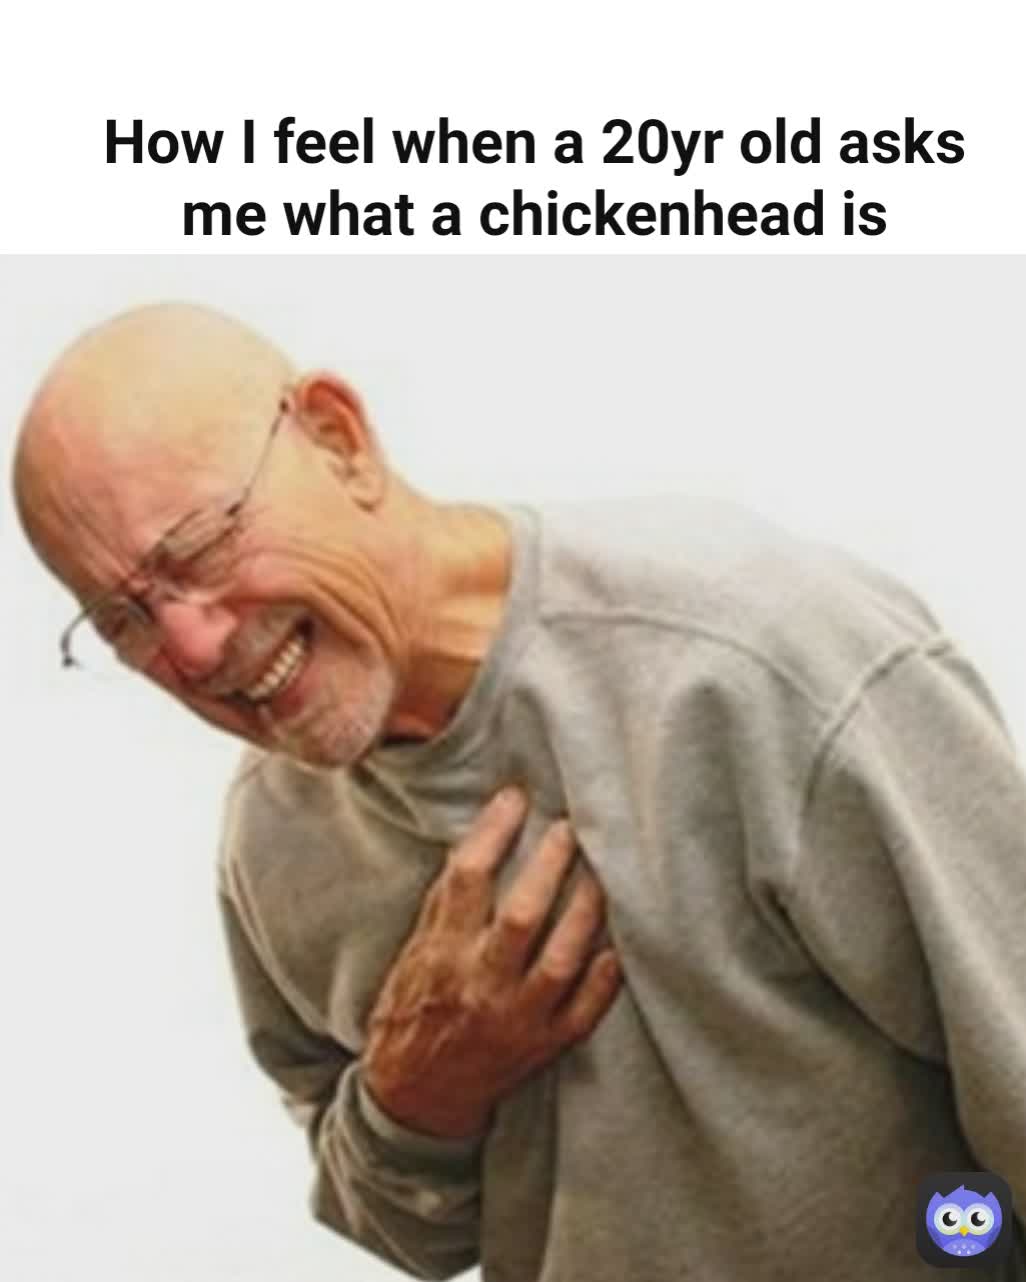 How I feel when a 20yr old asks me what a chickenhead is